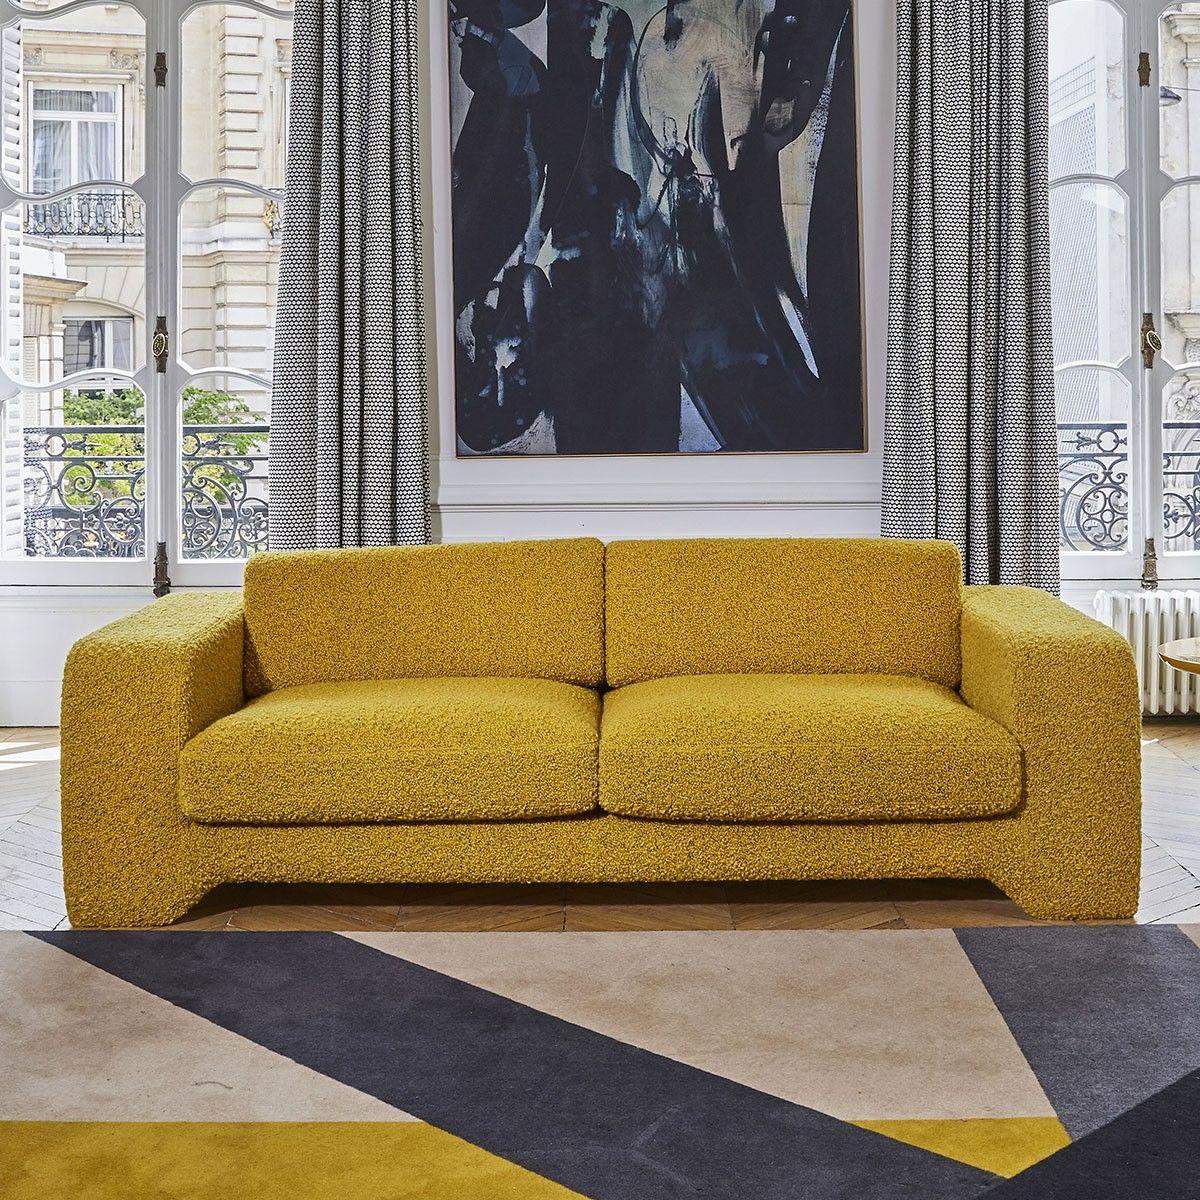 Popus Editions Giovanna 3 seater sofa in Marine Navy Como Velvet upholstery

Giovanna is a sofa with a strong profile. A sober, plush line, with this famous detail that changes everything, so as not to forget its strength of character and this